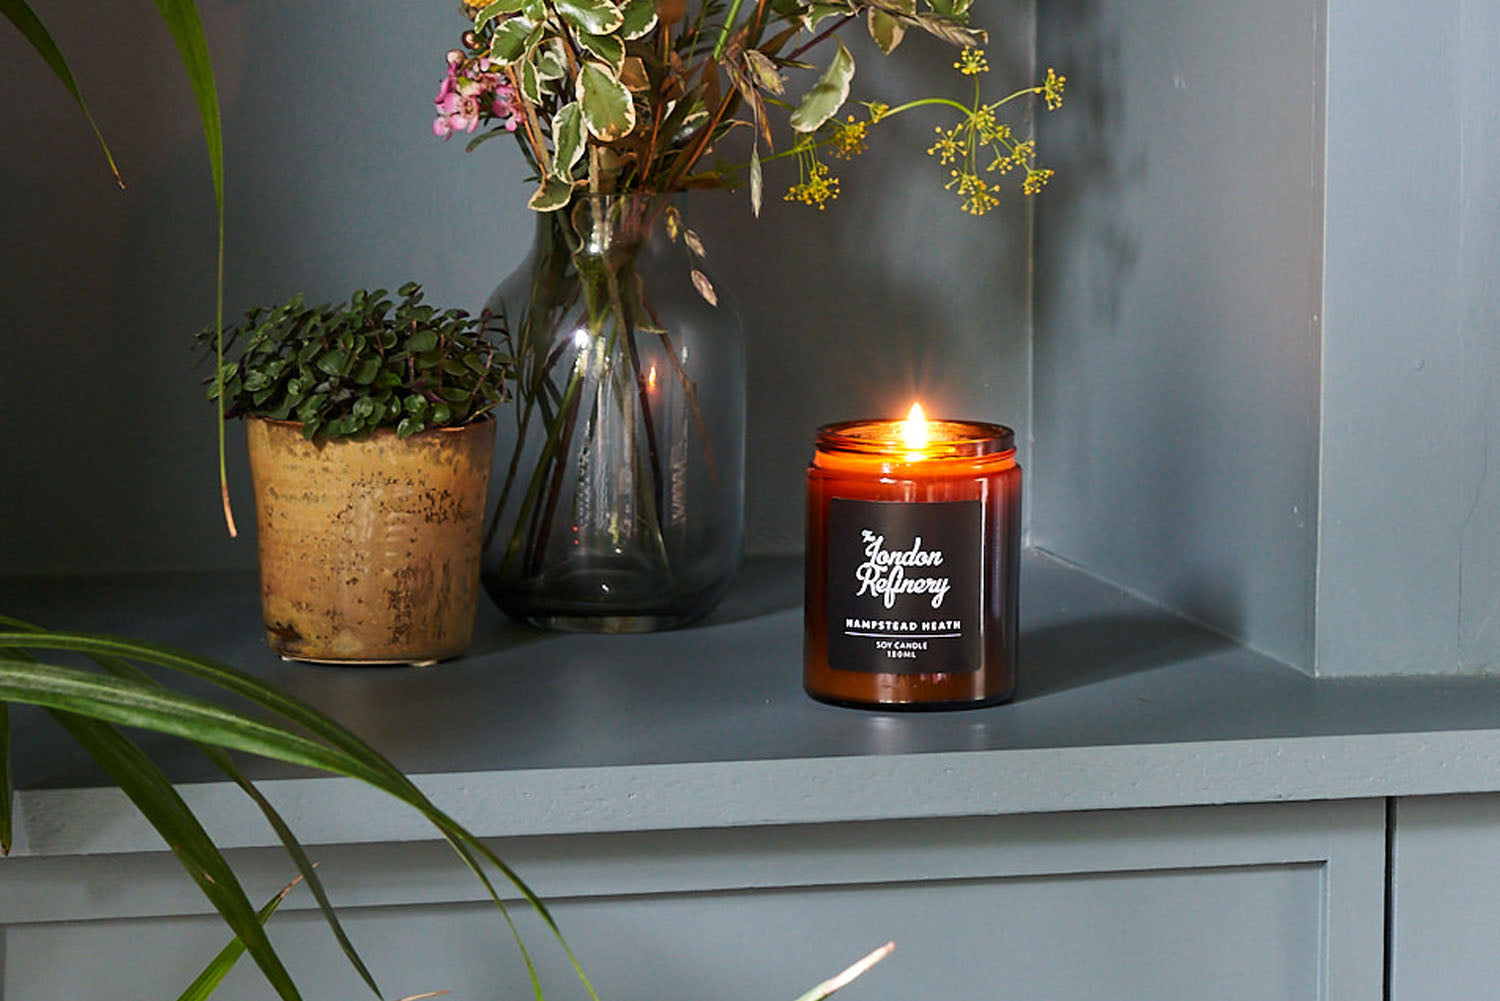 London Refinery Candle Kit – The London Refinery